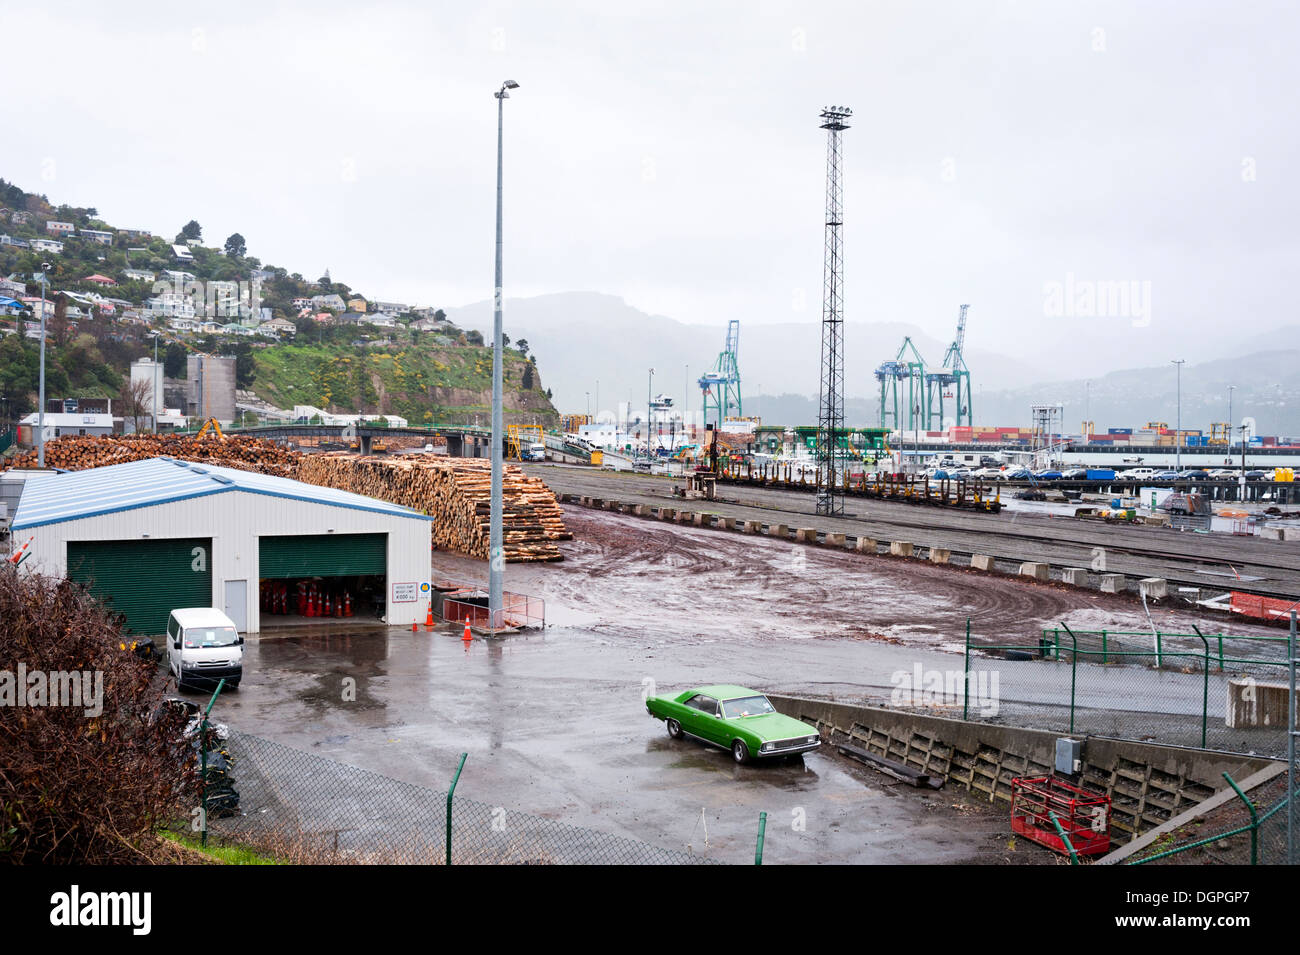 View of Lyttelton, the port of Christchurch, New Zealand. Stock Photo